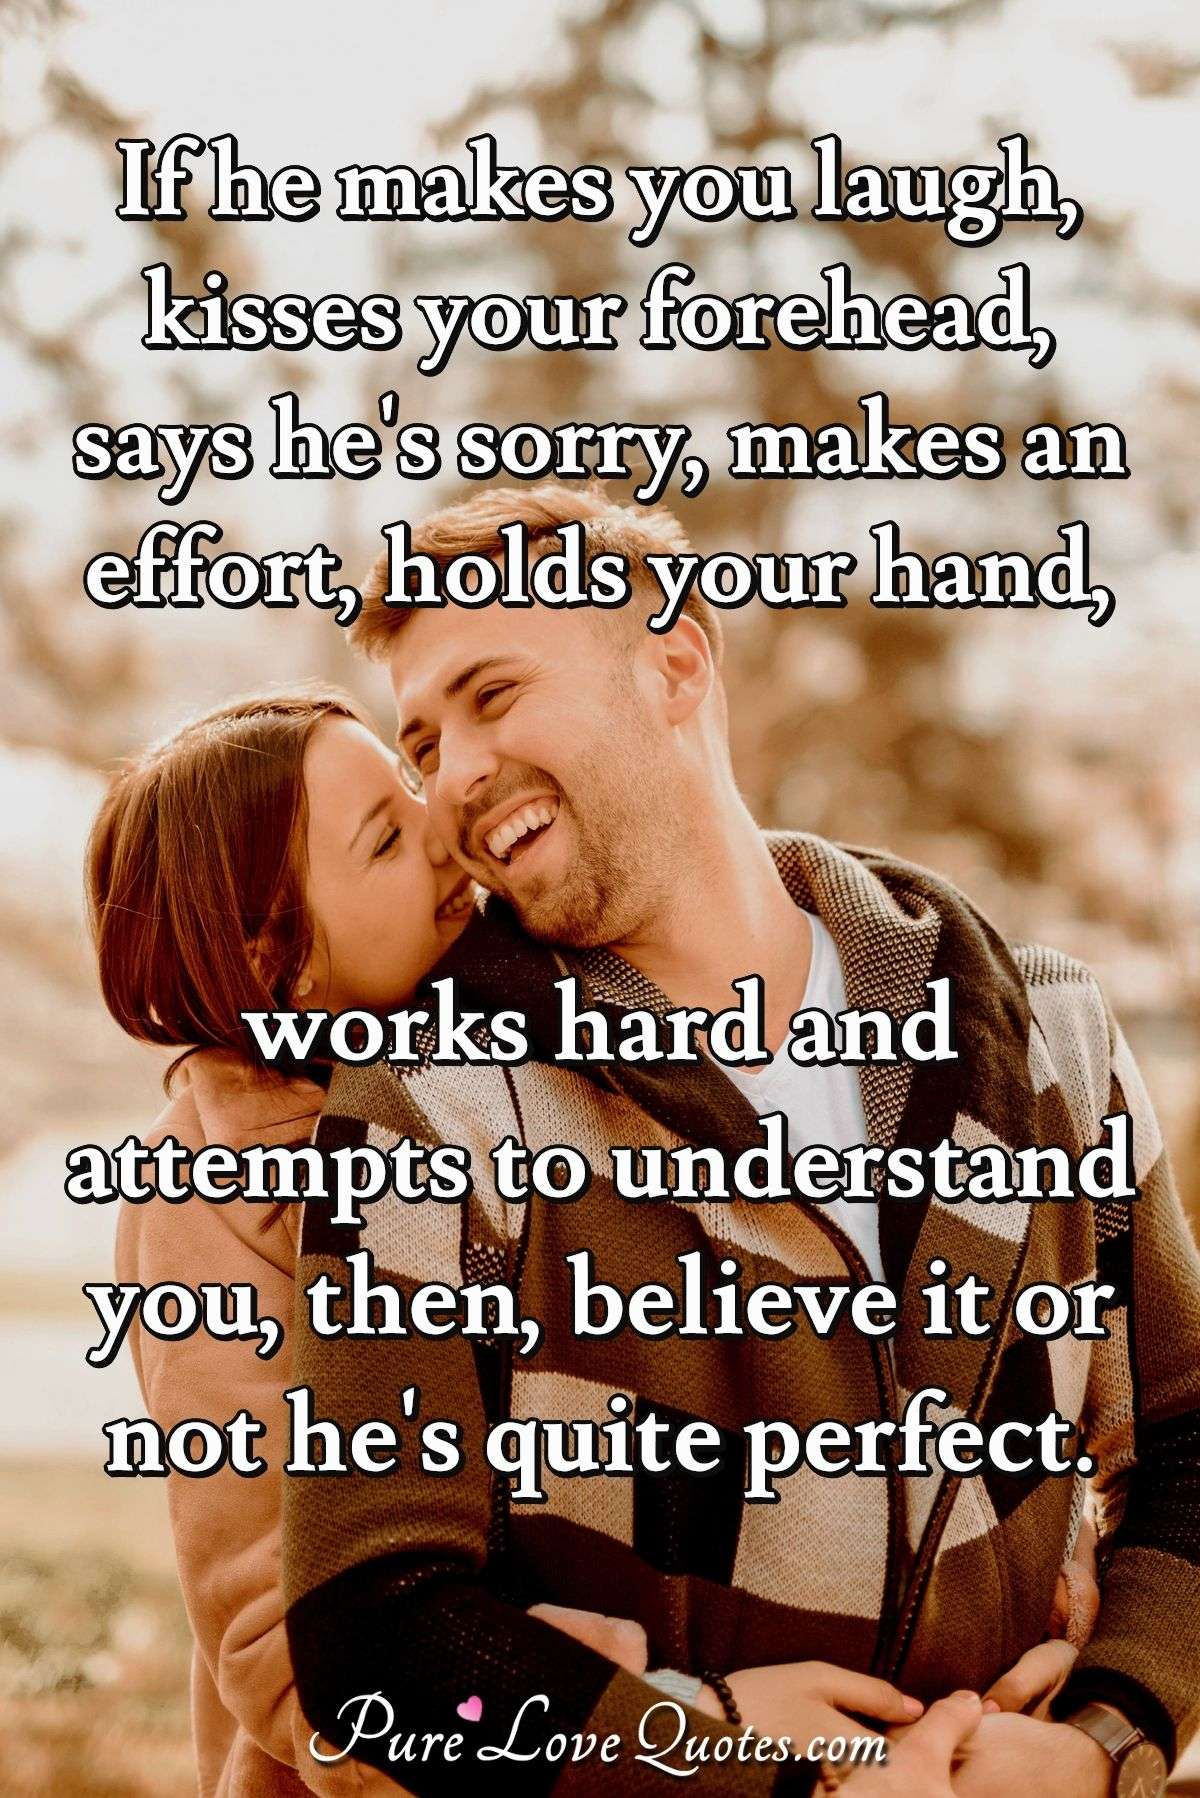 If he makes you laugh, kisses your forehead, says he's sorry, makes an effort, holds your hand, works hard and attempts to understand you, then, believe it or not he's quite perfect. - Anonymous